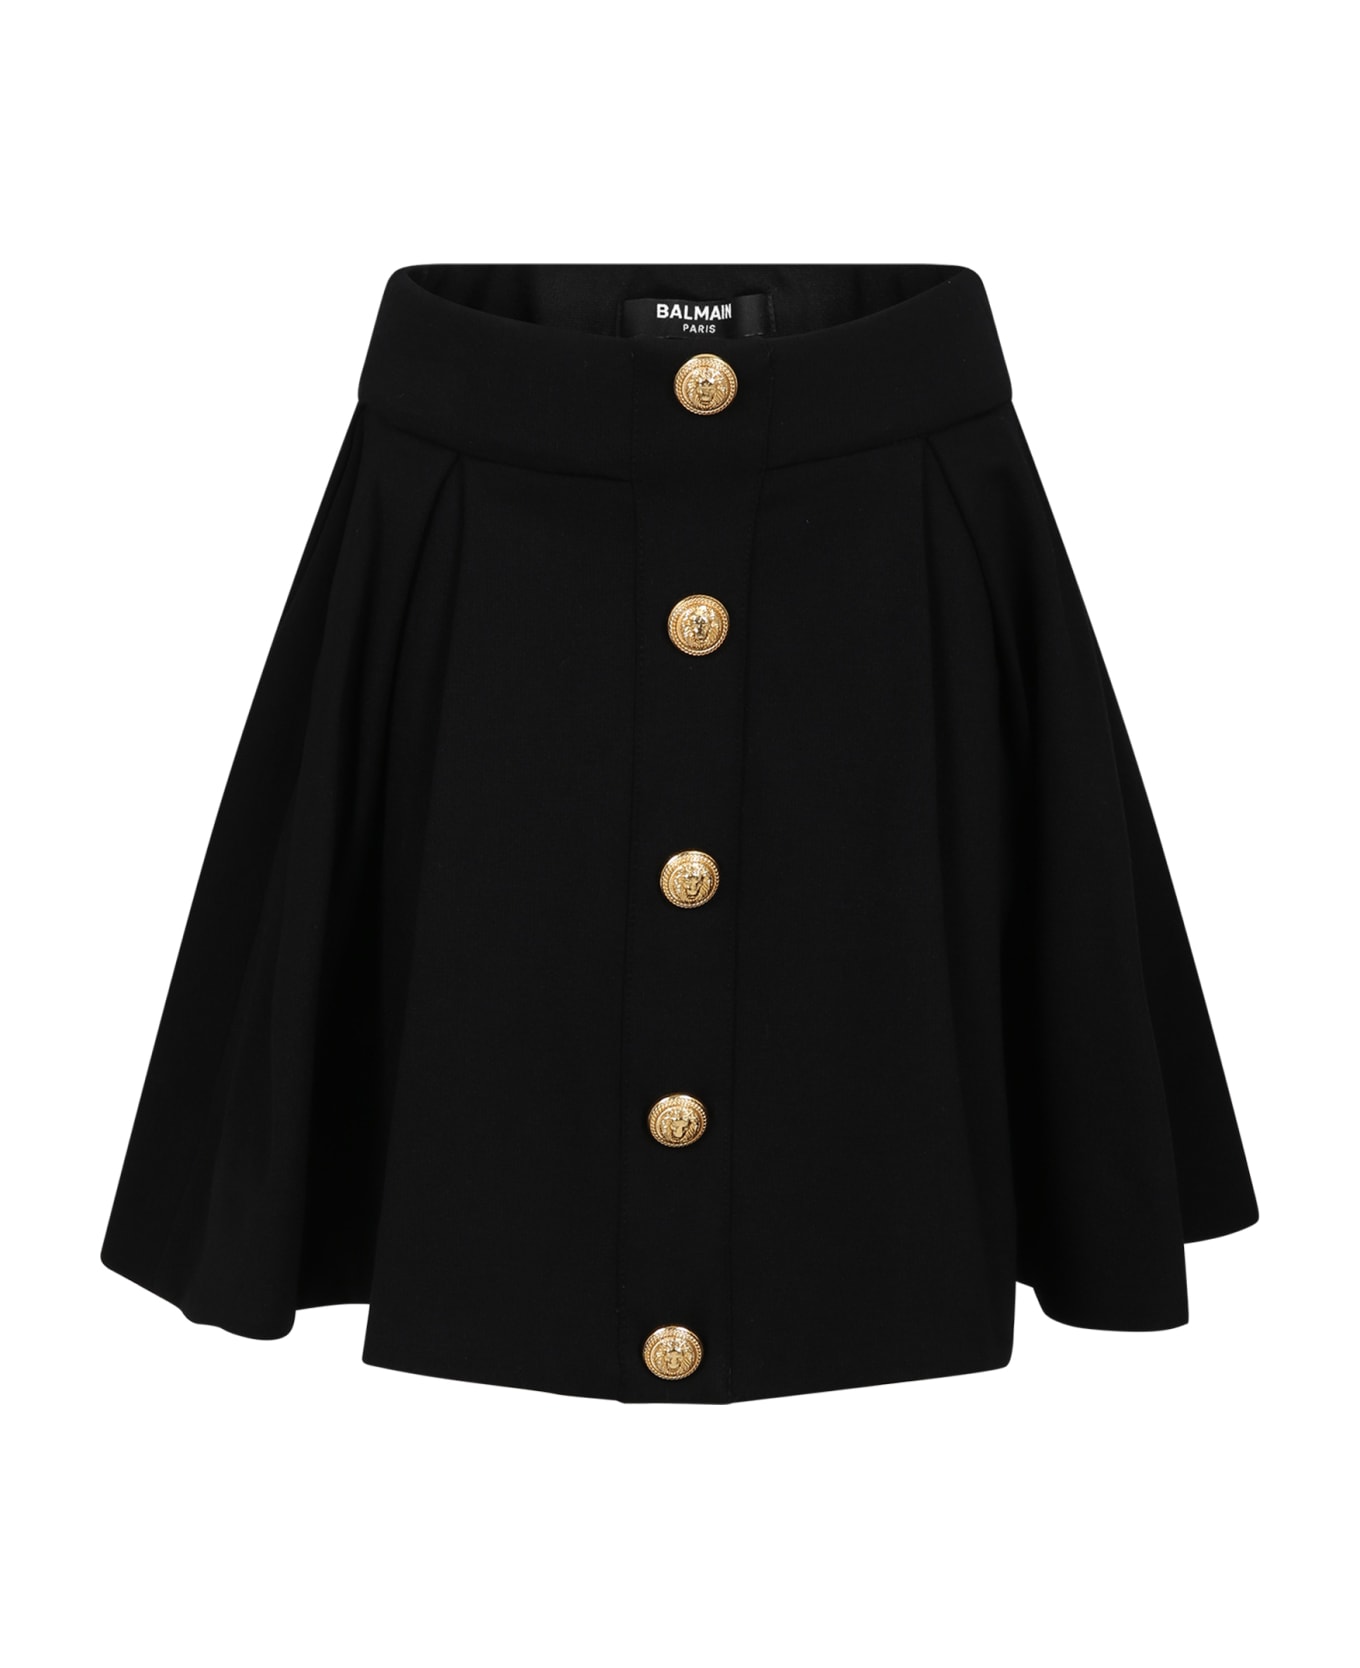 Balmain Black Skirt For Girl With Iconic Buttons - Black